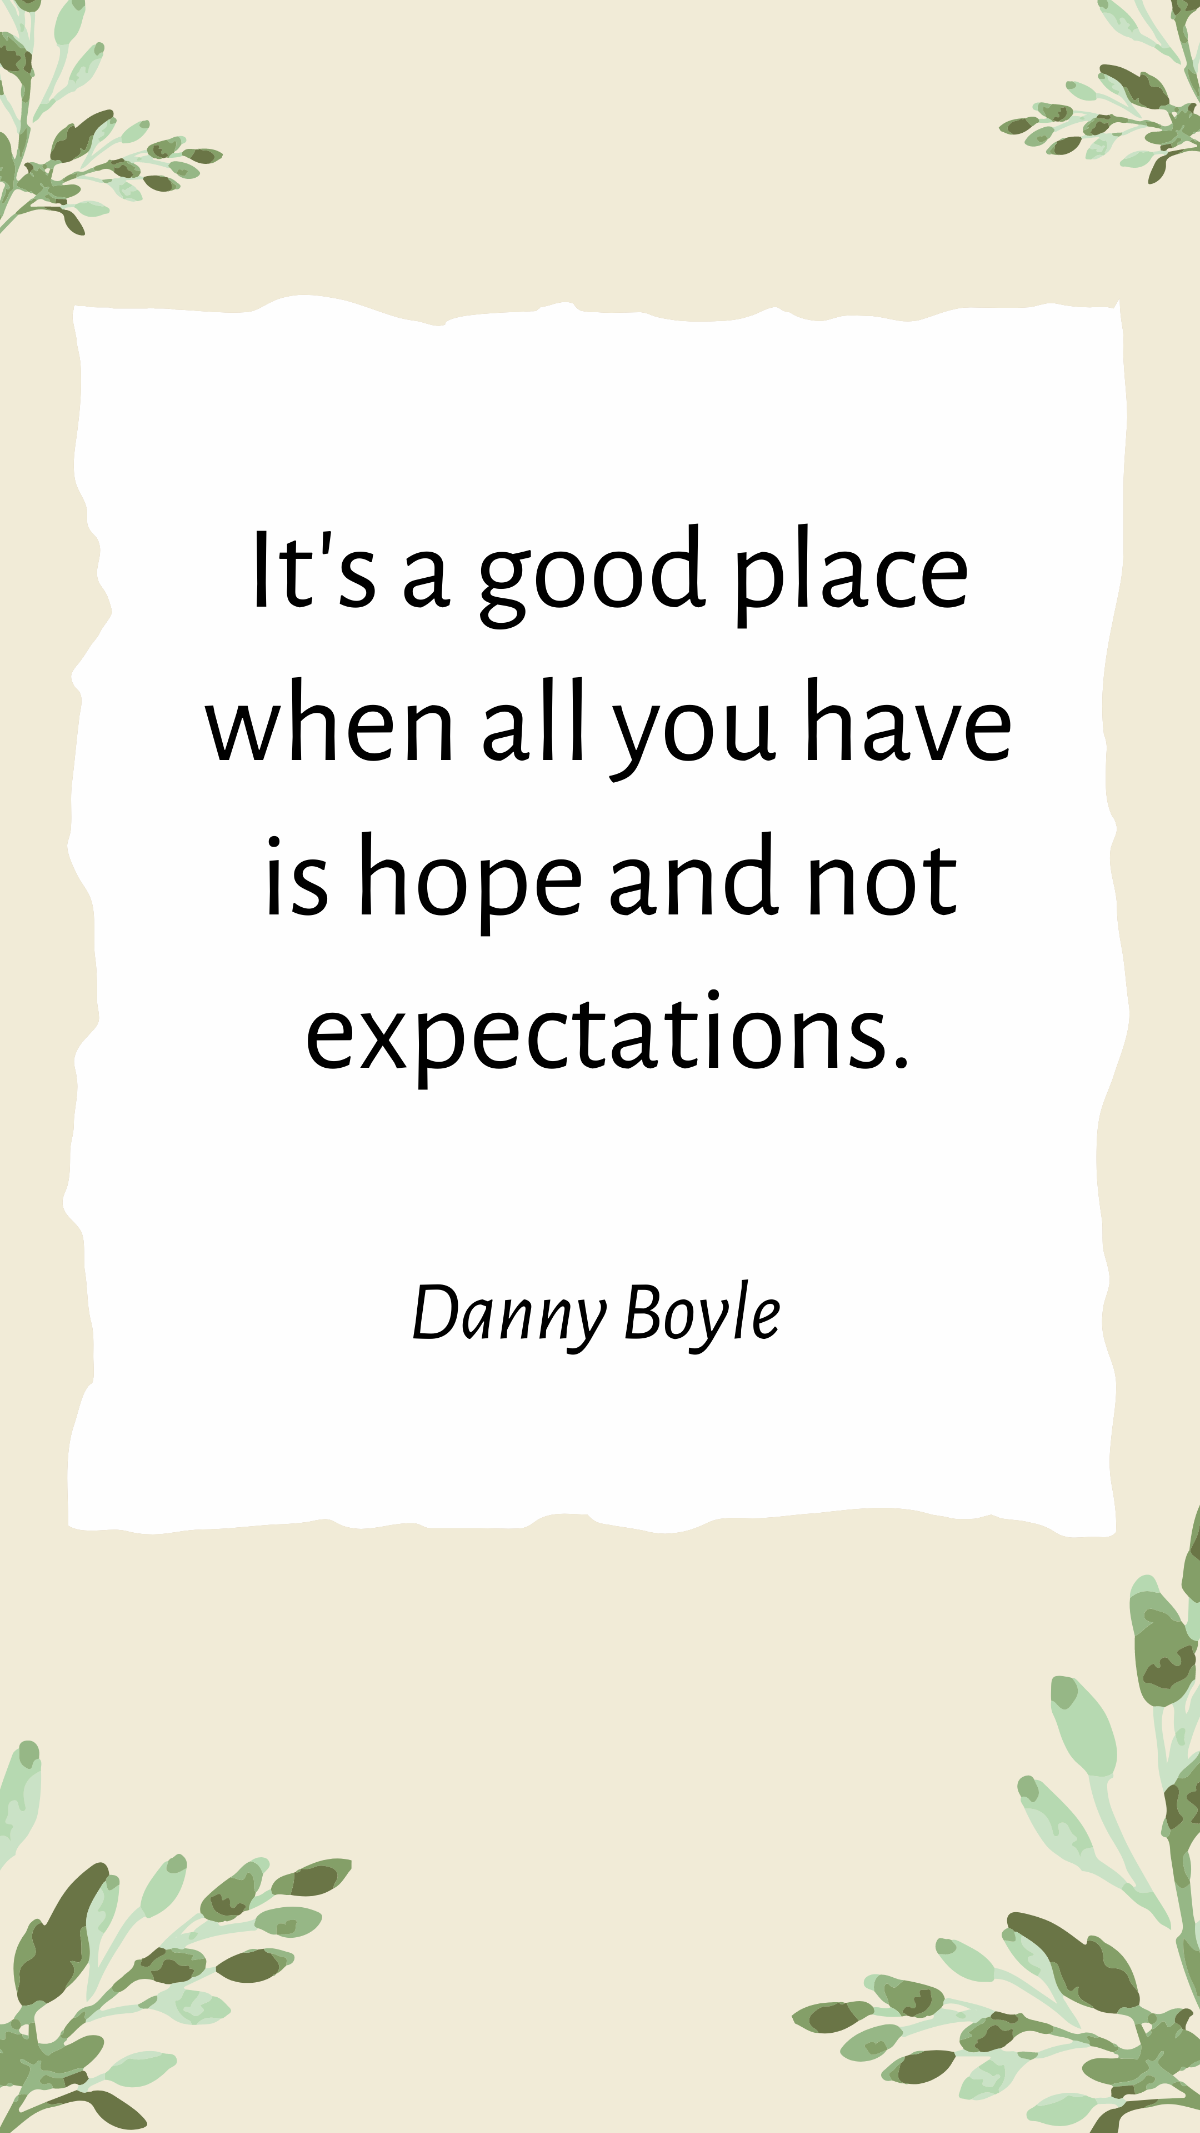 Danny Boyle - It's a good place when all you have is hope and not expectations. Template